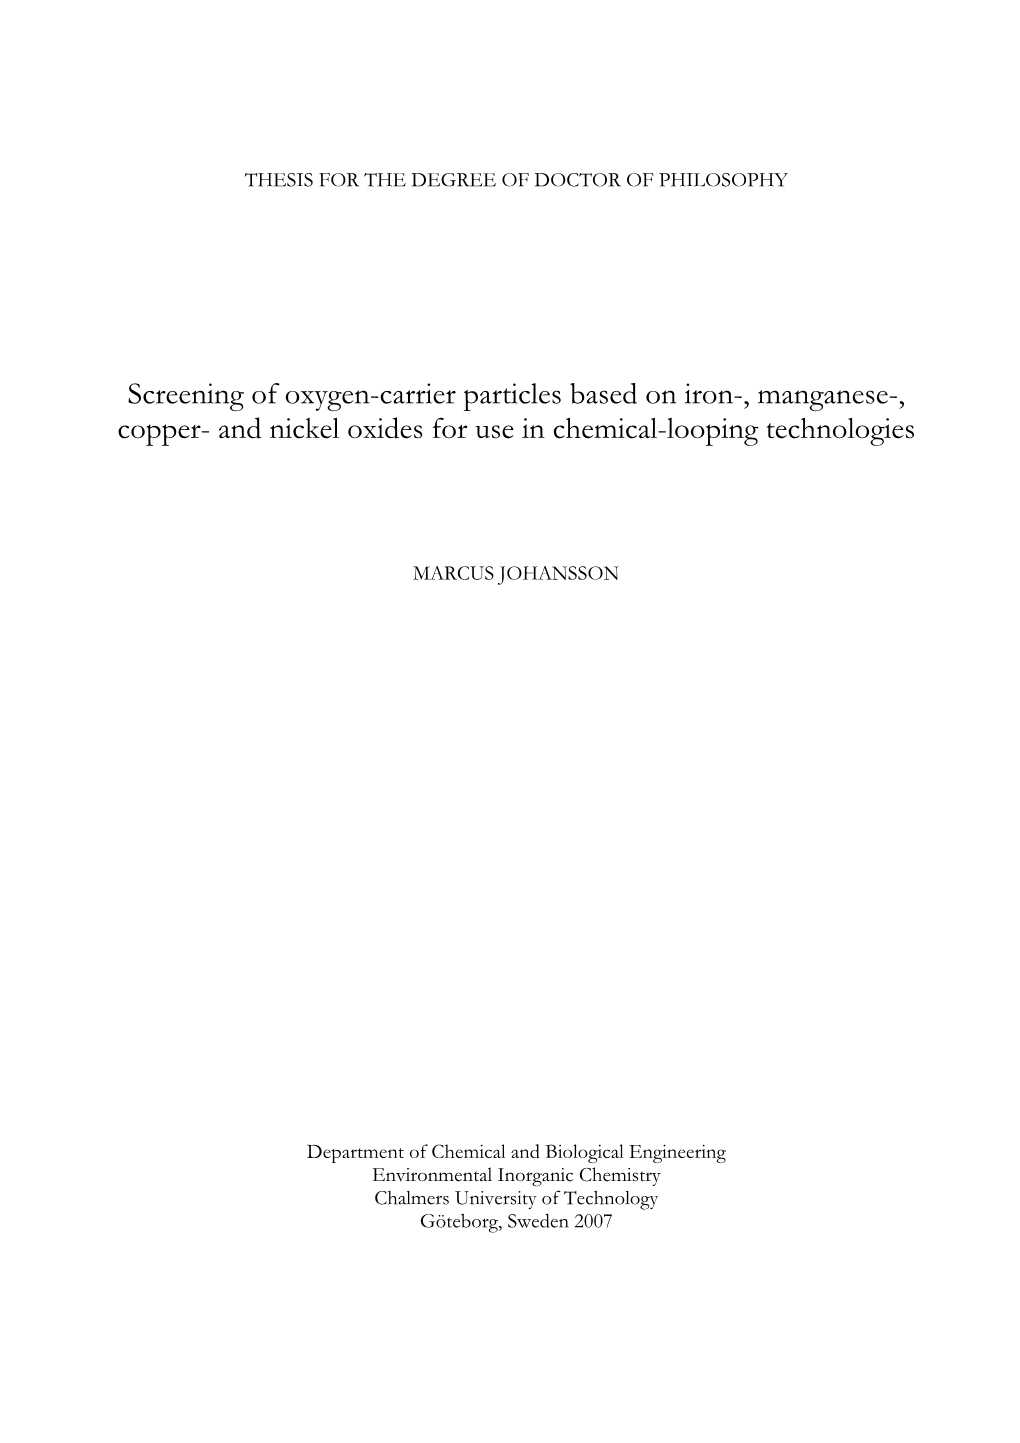 Screening of Oxygen-Carrier Particles Based on Iron-, Manganese-, Copper- and Nickel Oxides for Use in Chemical-Looping Technologies